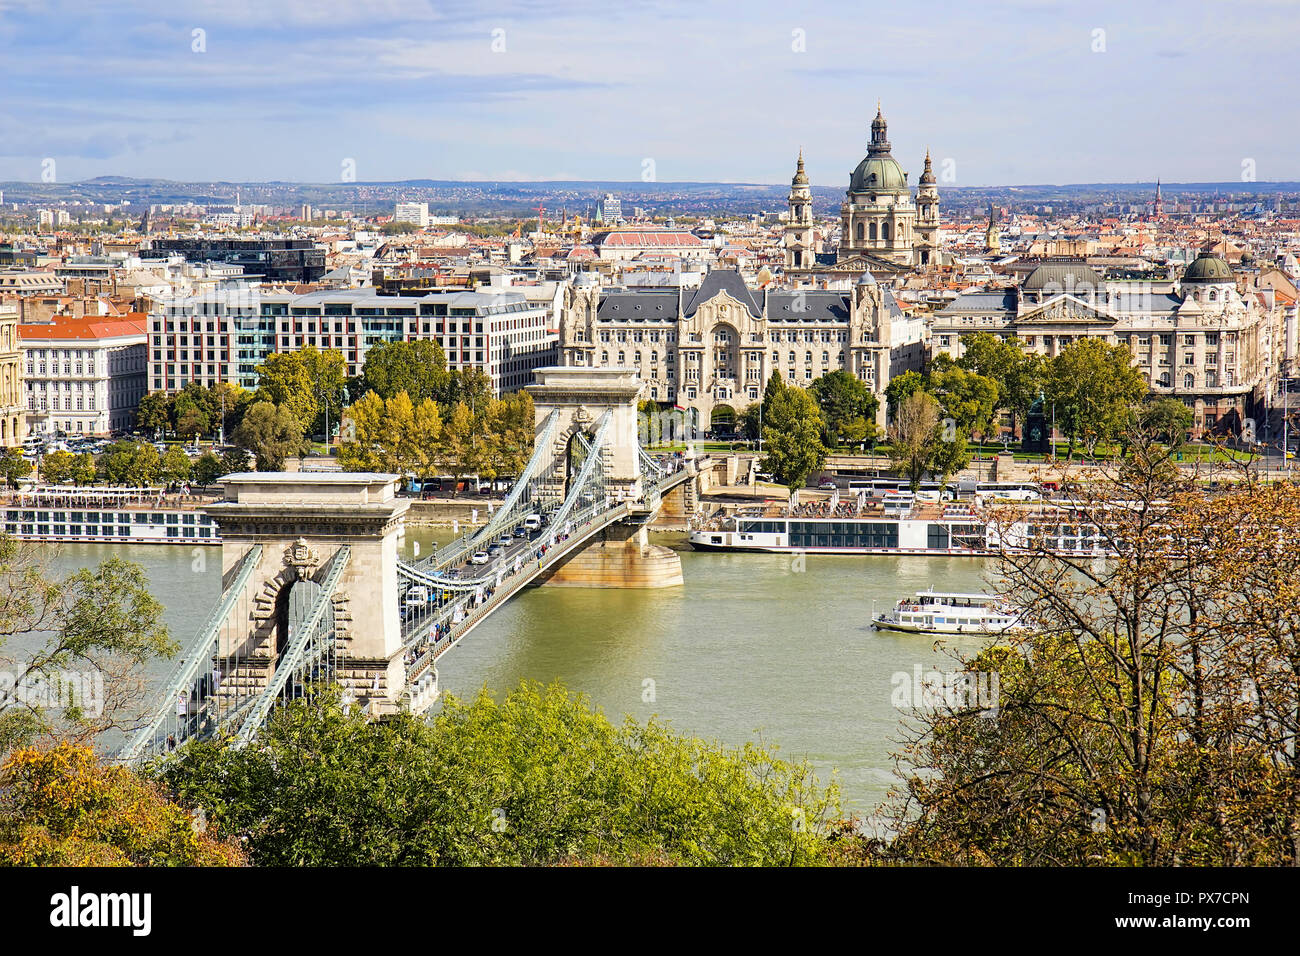 Chain Bridge or Szechenyi Bridge across Danube river in Budapest, Hungary, with old buildings and dome of St Stephen's Basilica or Szent Istvan Bazili Stock Photo